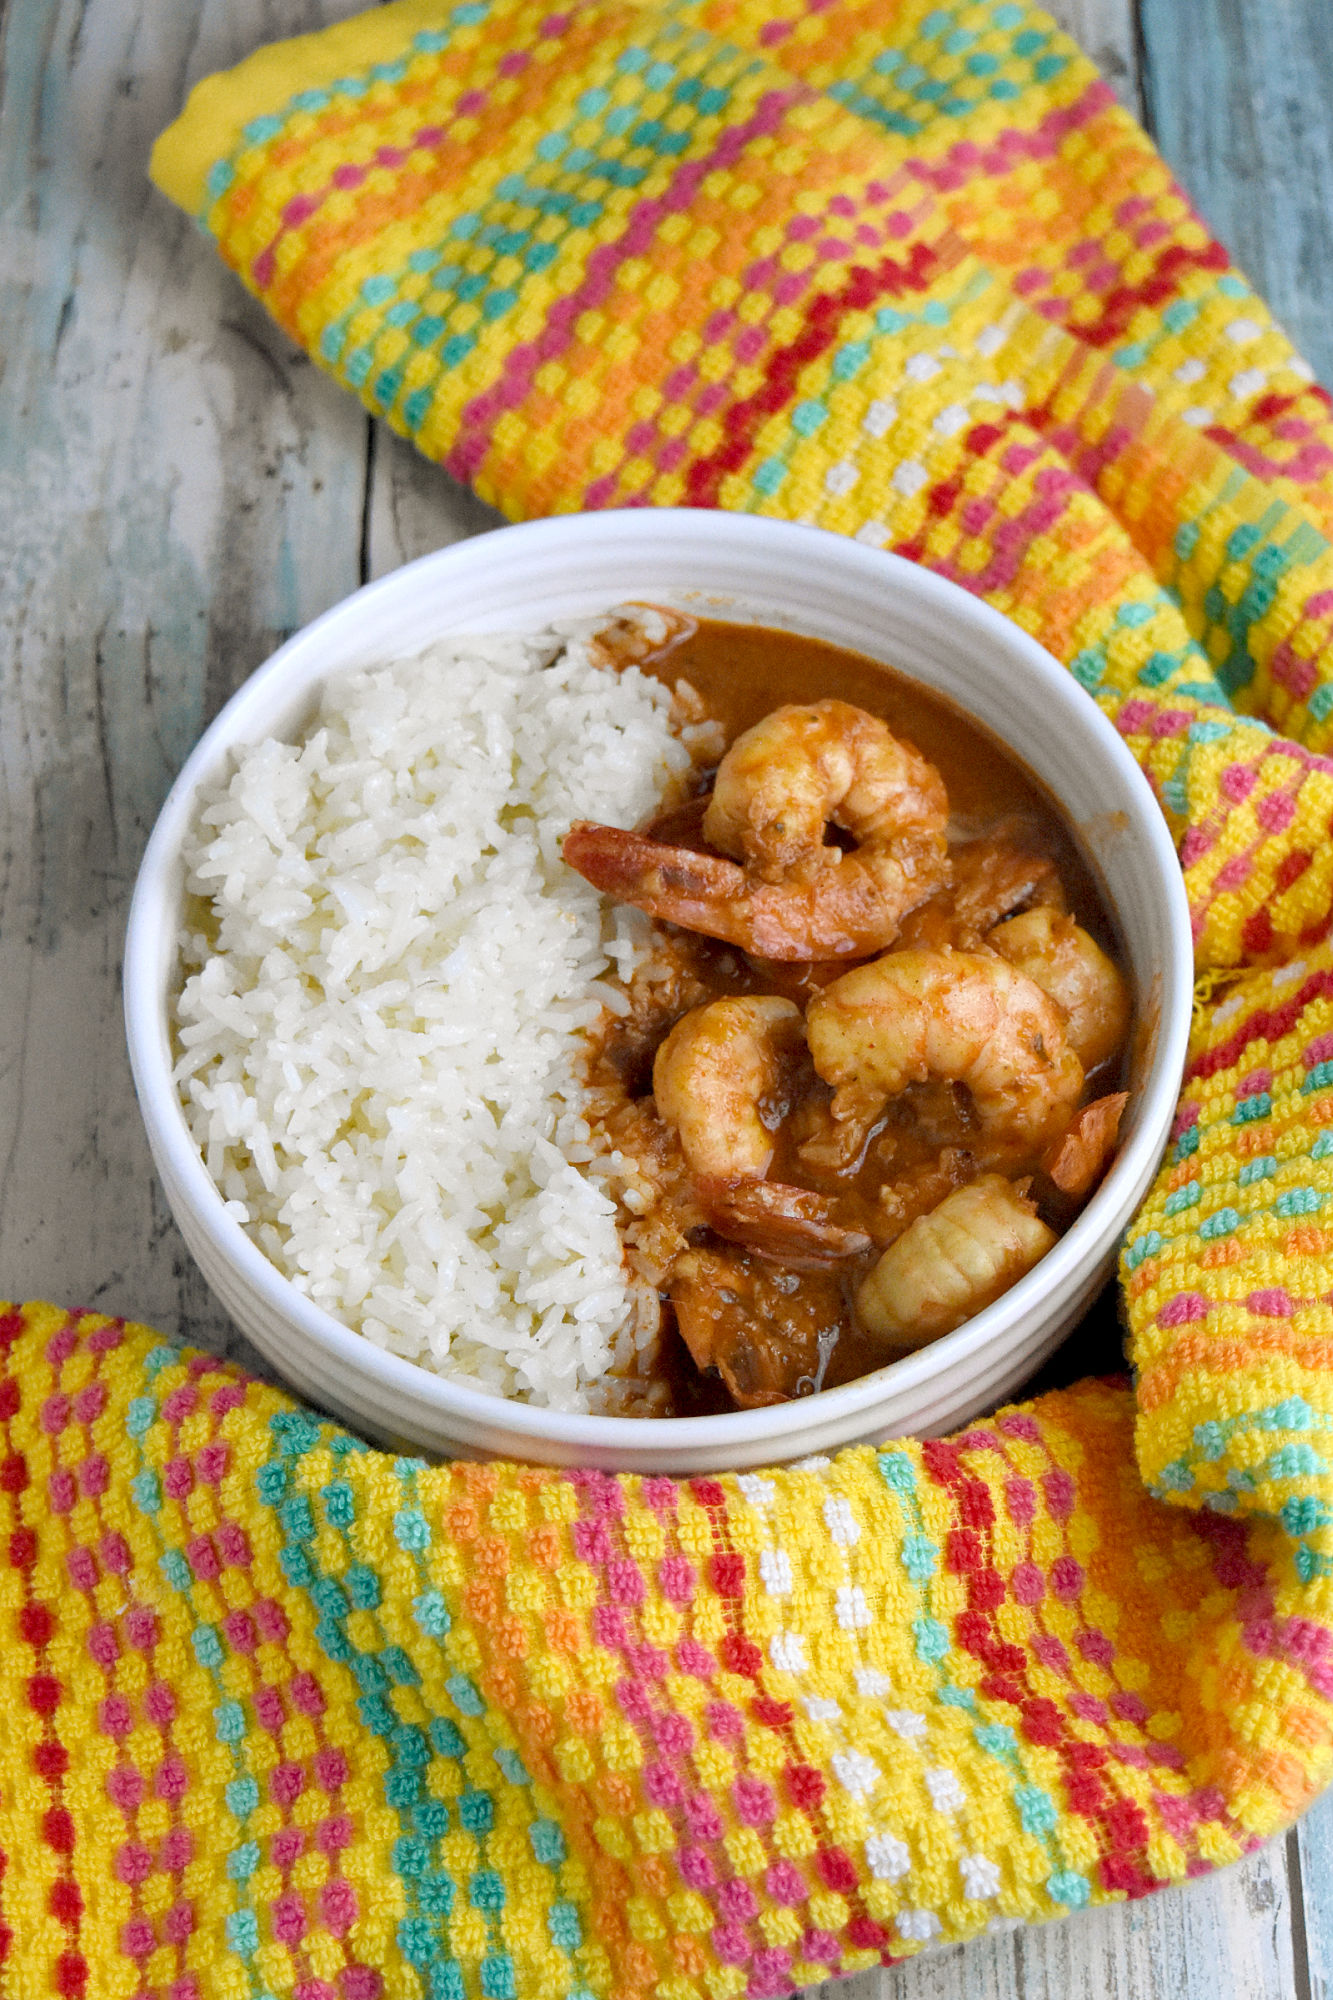 If you want an easy but amazing appetizer, then try these New Orleans Style Barbecue Shrimp. They’re quick, simple, and packed with spicy New Orleans flavor. #OurFamilyTable #NationalShrimpDay #NewOrleansBBQShrimp #NewOrleansRecipe #shrimprecipe #BBQShrimp
